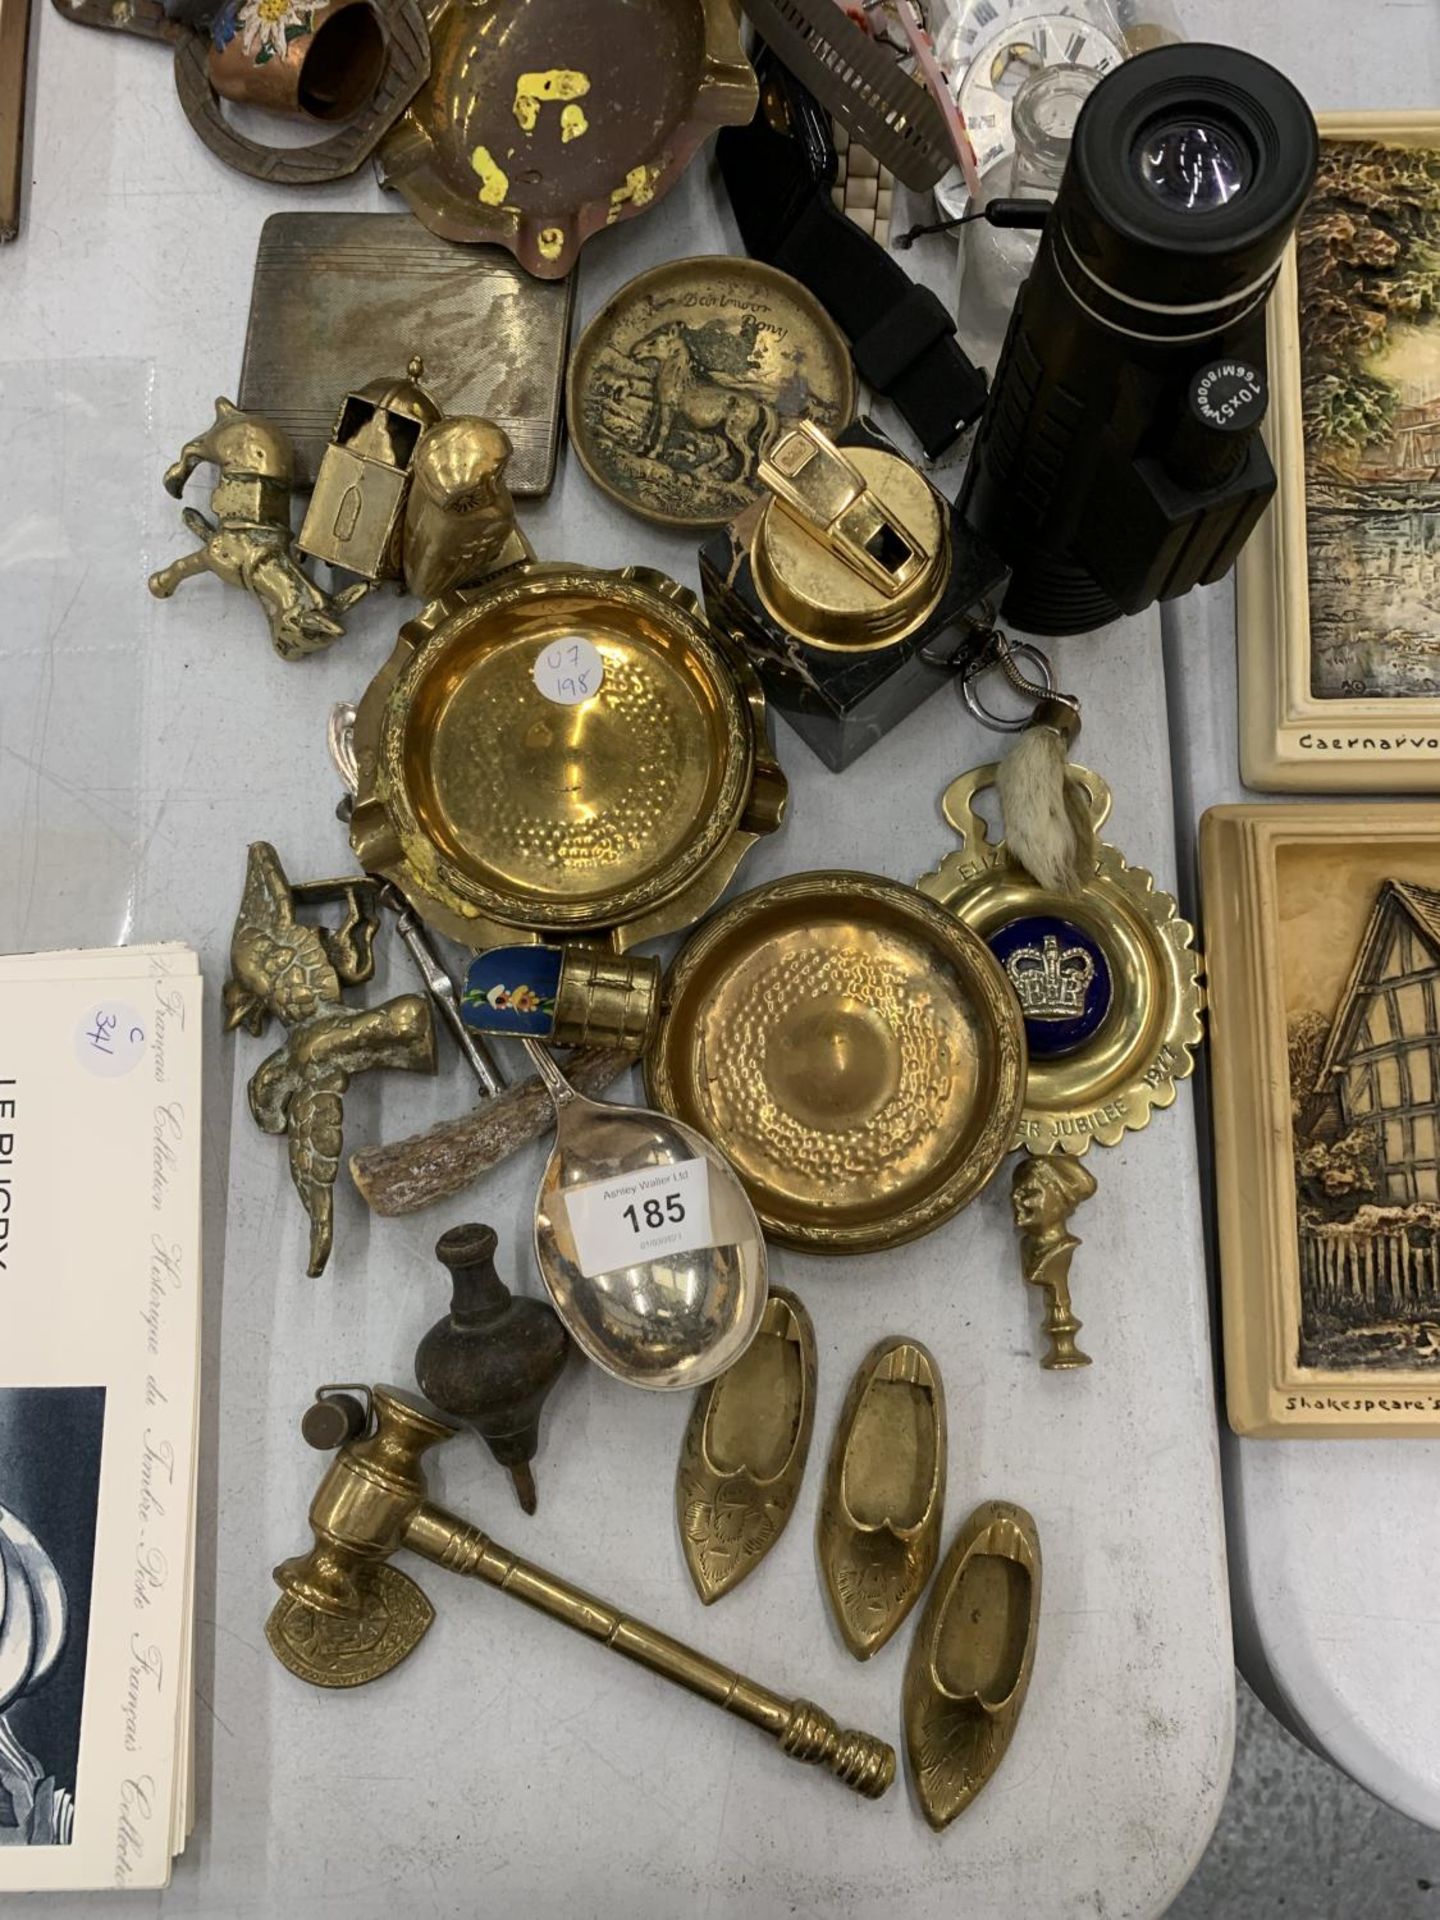 A LARGE COLLECTION OF BRASS ITEMS TO INCLUDE BELLS, FIGURES, ETC PLUS WATCH FACES, A CIGARETTE CASE, - Image 4 of 14